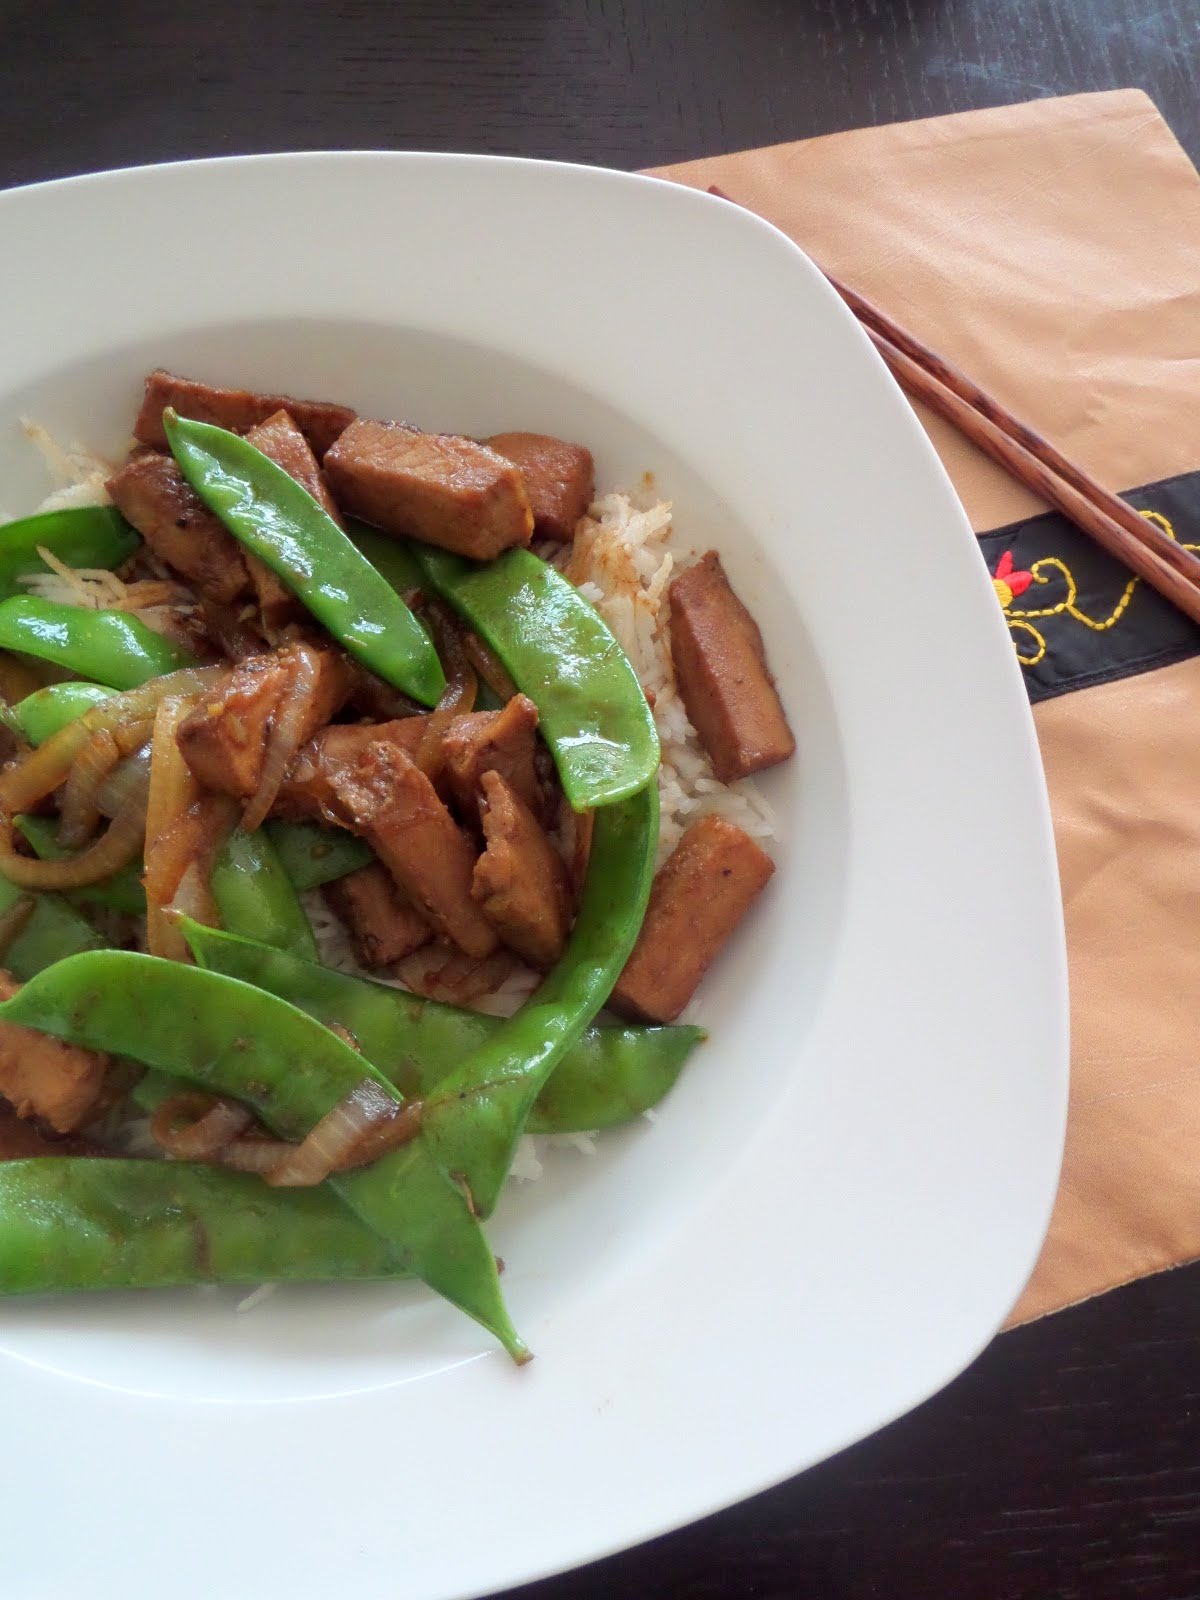 Pork and Peas Stir Fry:  A sweet and spicy stir fry made with leftover Herb Roasted Pork Tenderloin and a variety of peas.